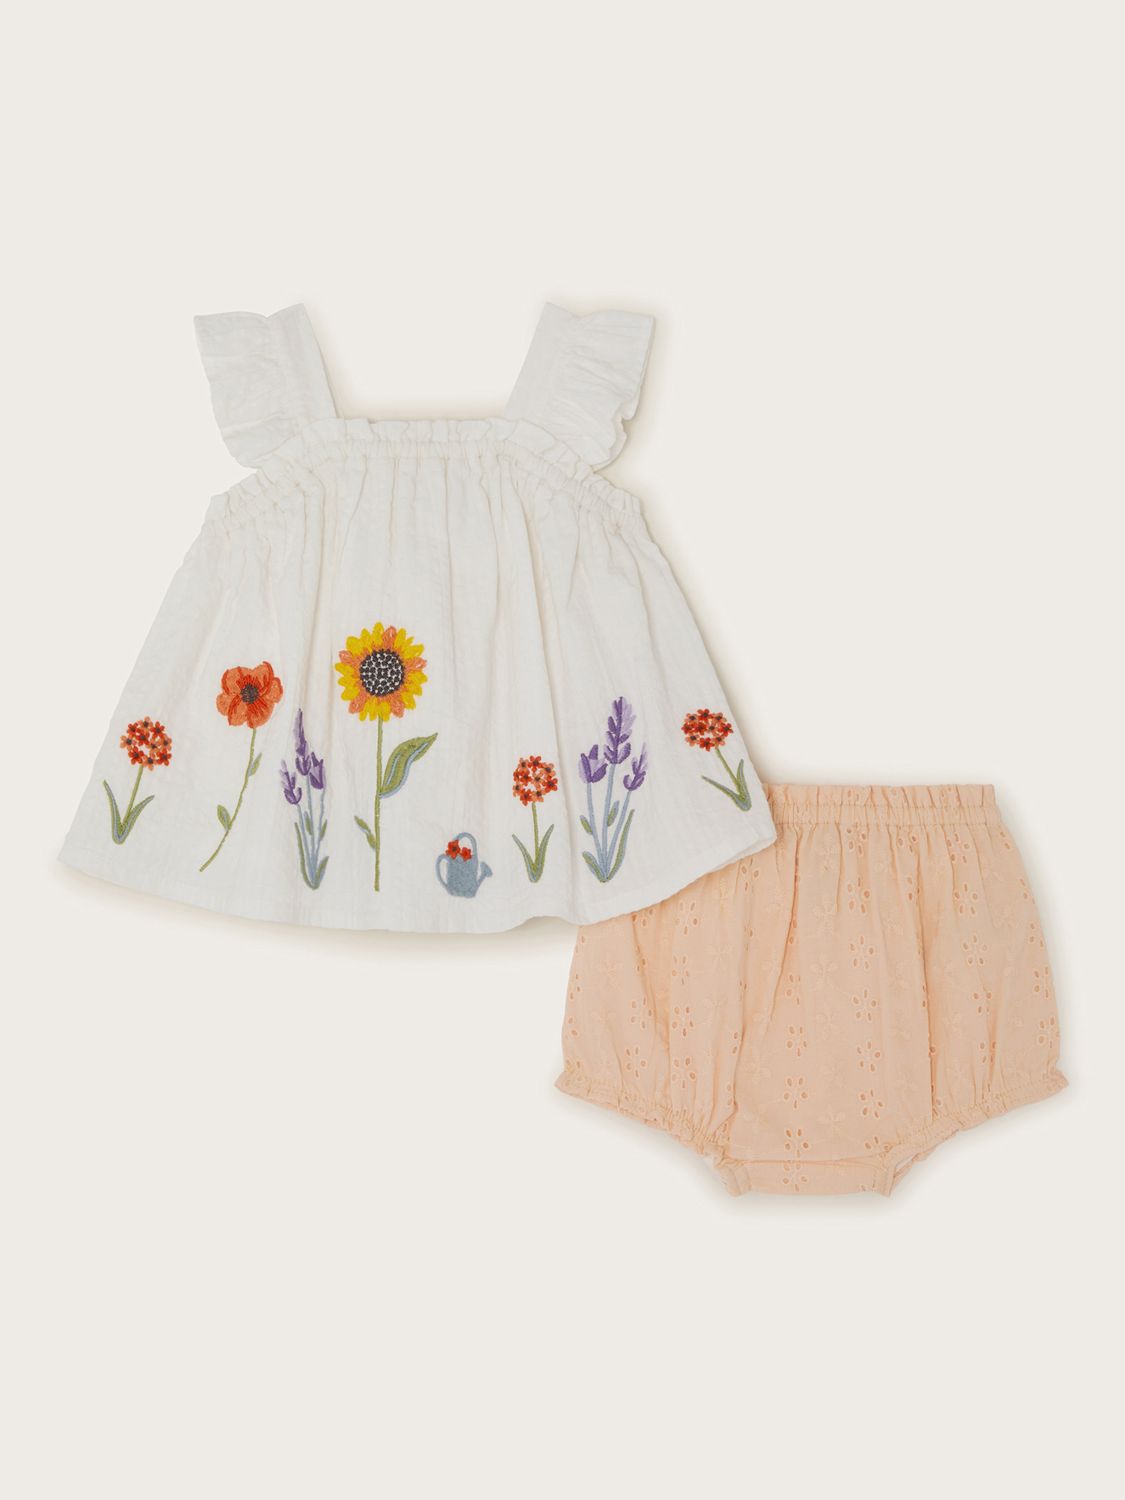 Monsoon Baby Sunflower Embroidered Top & Broderie Bloomer Shorts Set, Ivory/Multi, 0-3 months